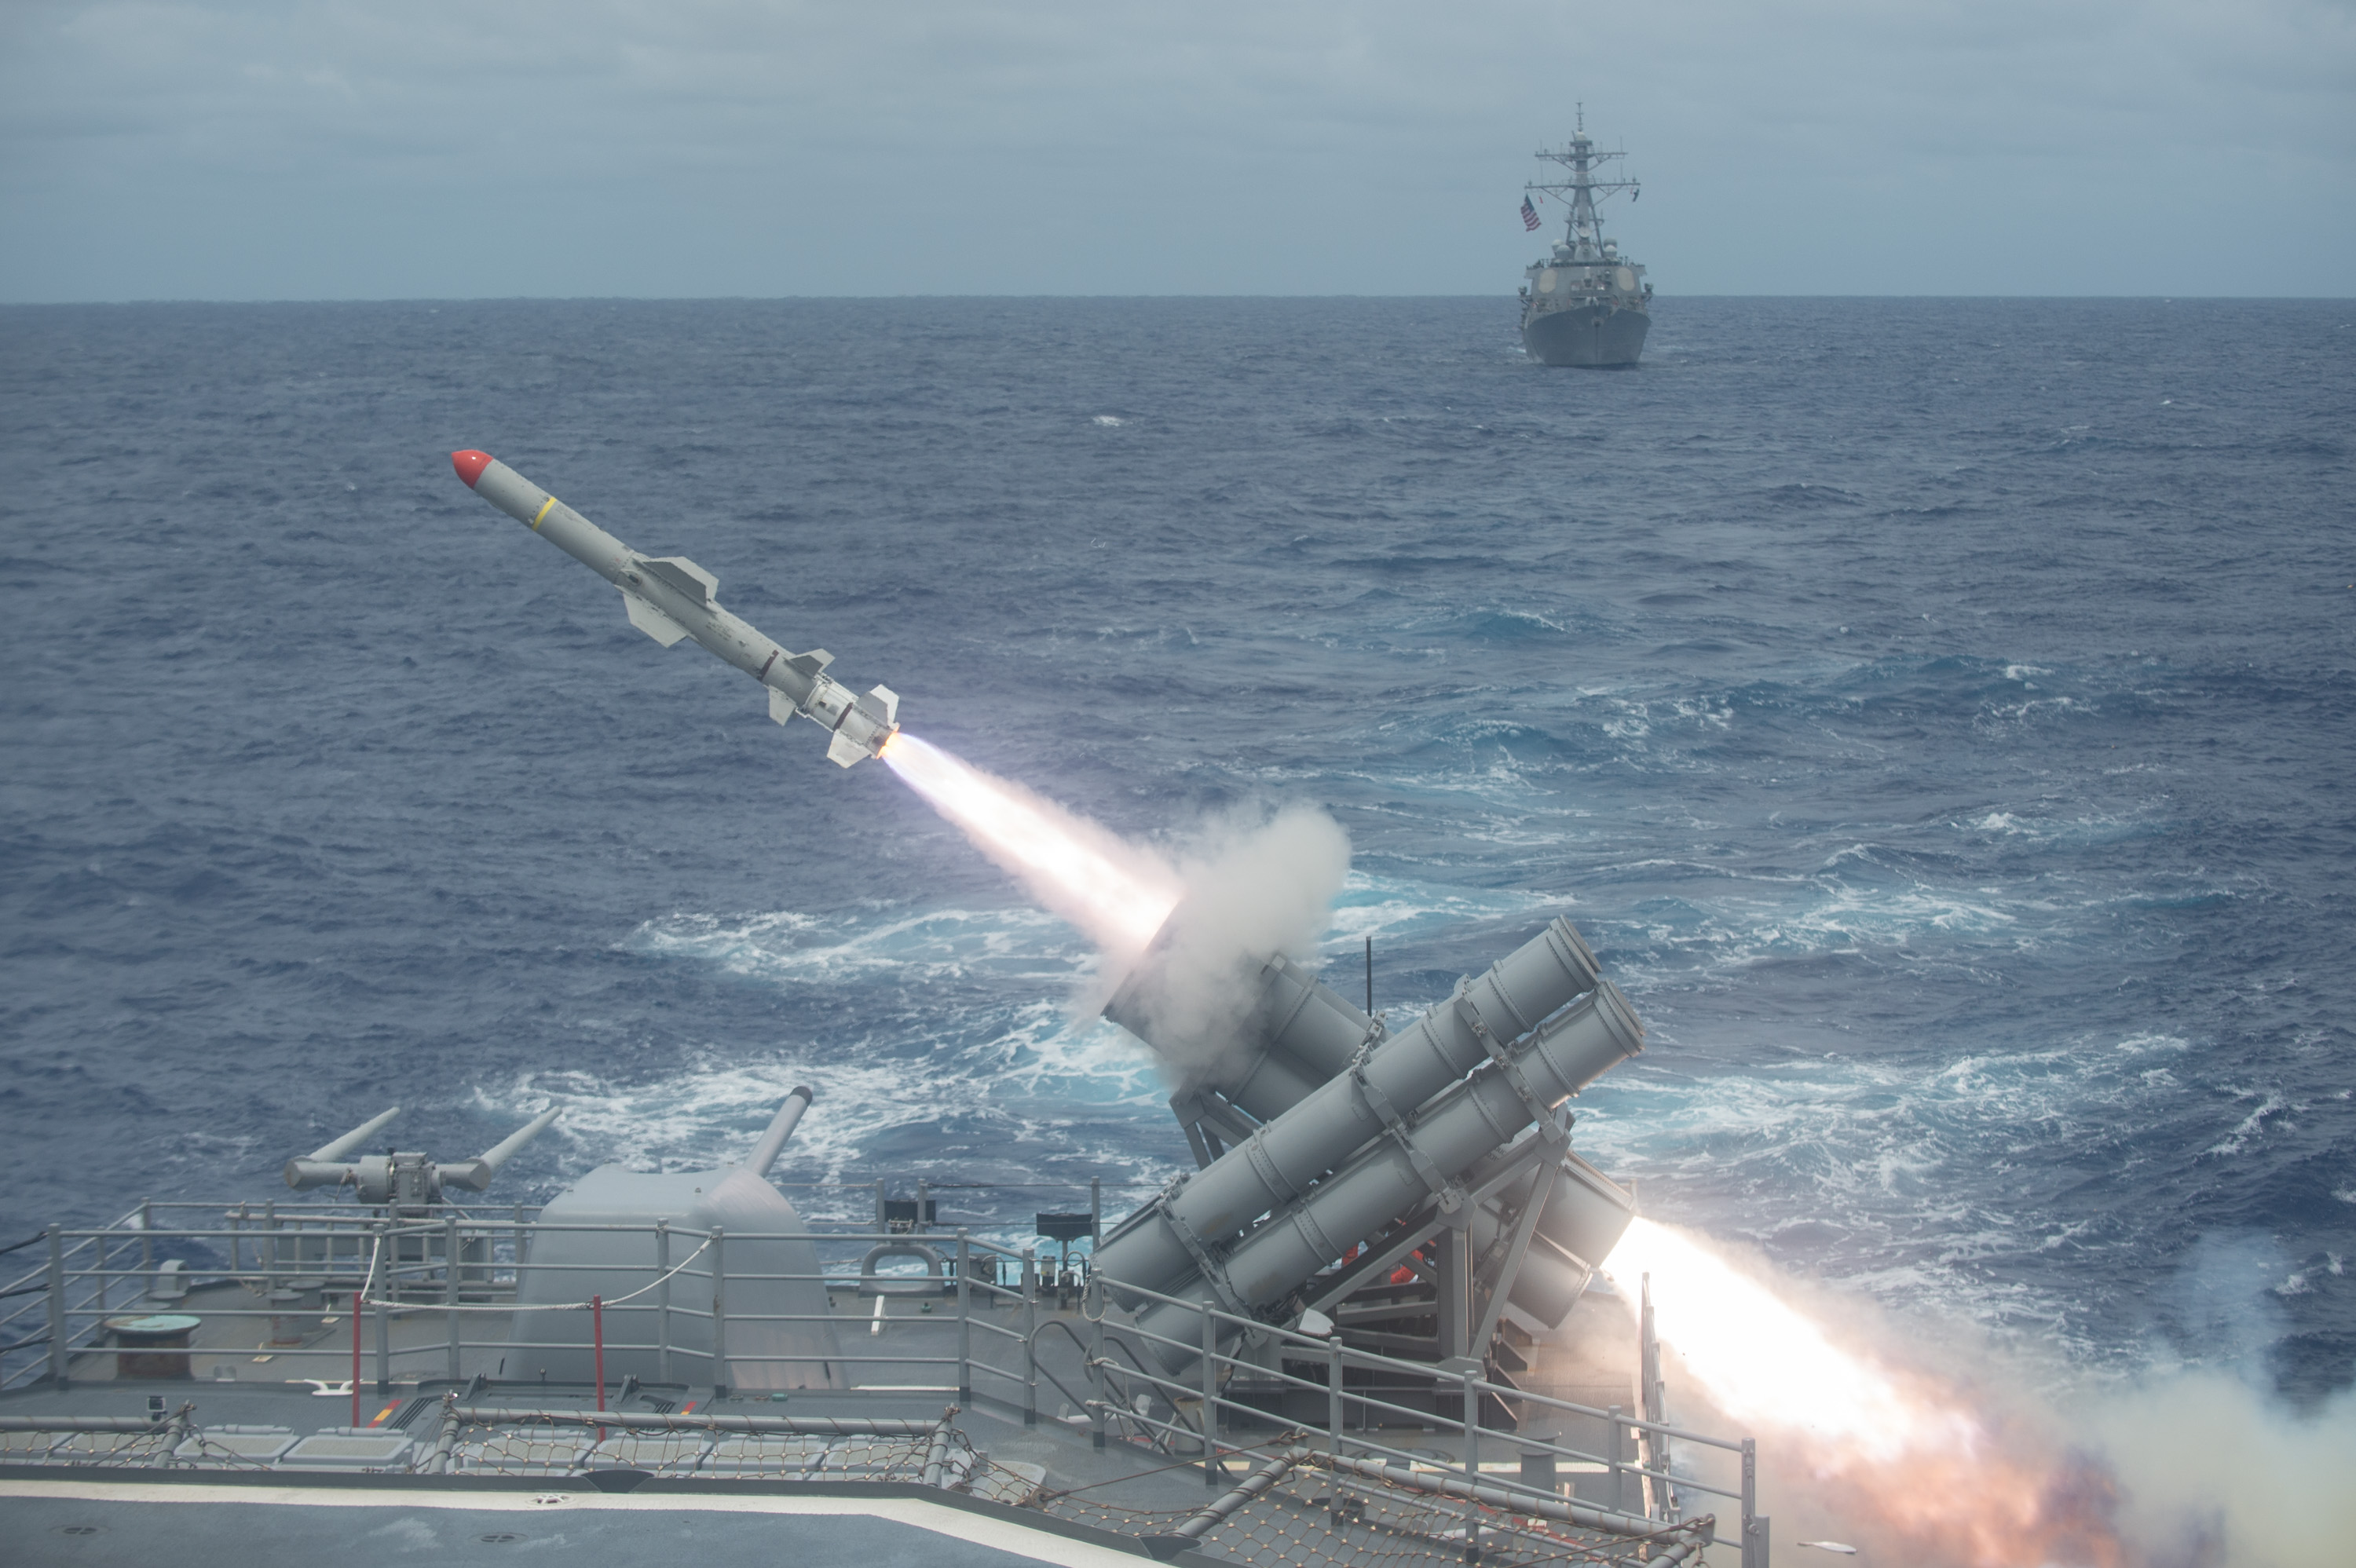 A Harpoon anti-surface missile is launched from the Ticonderoga-class guided-missile cruiser USS Shiloh (CG-67) in 2014. US Navy Photo